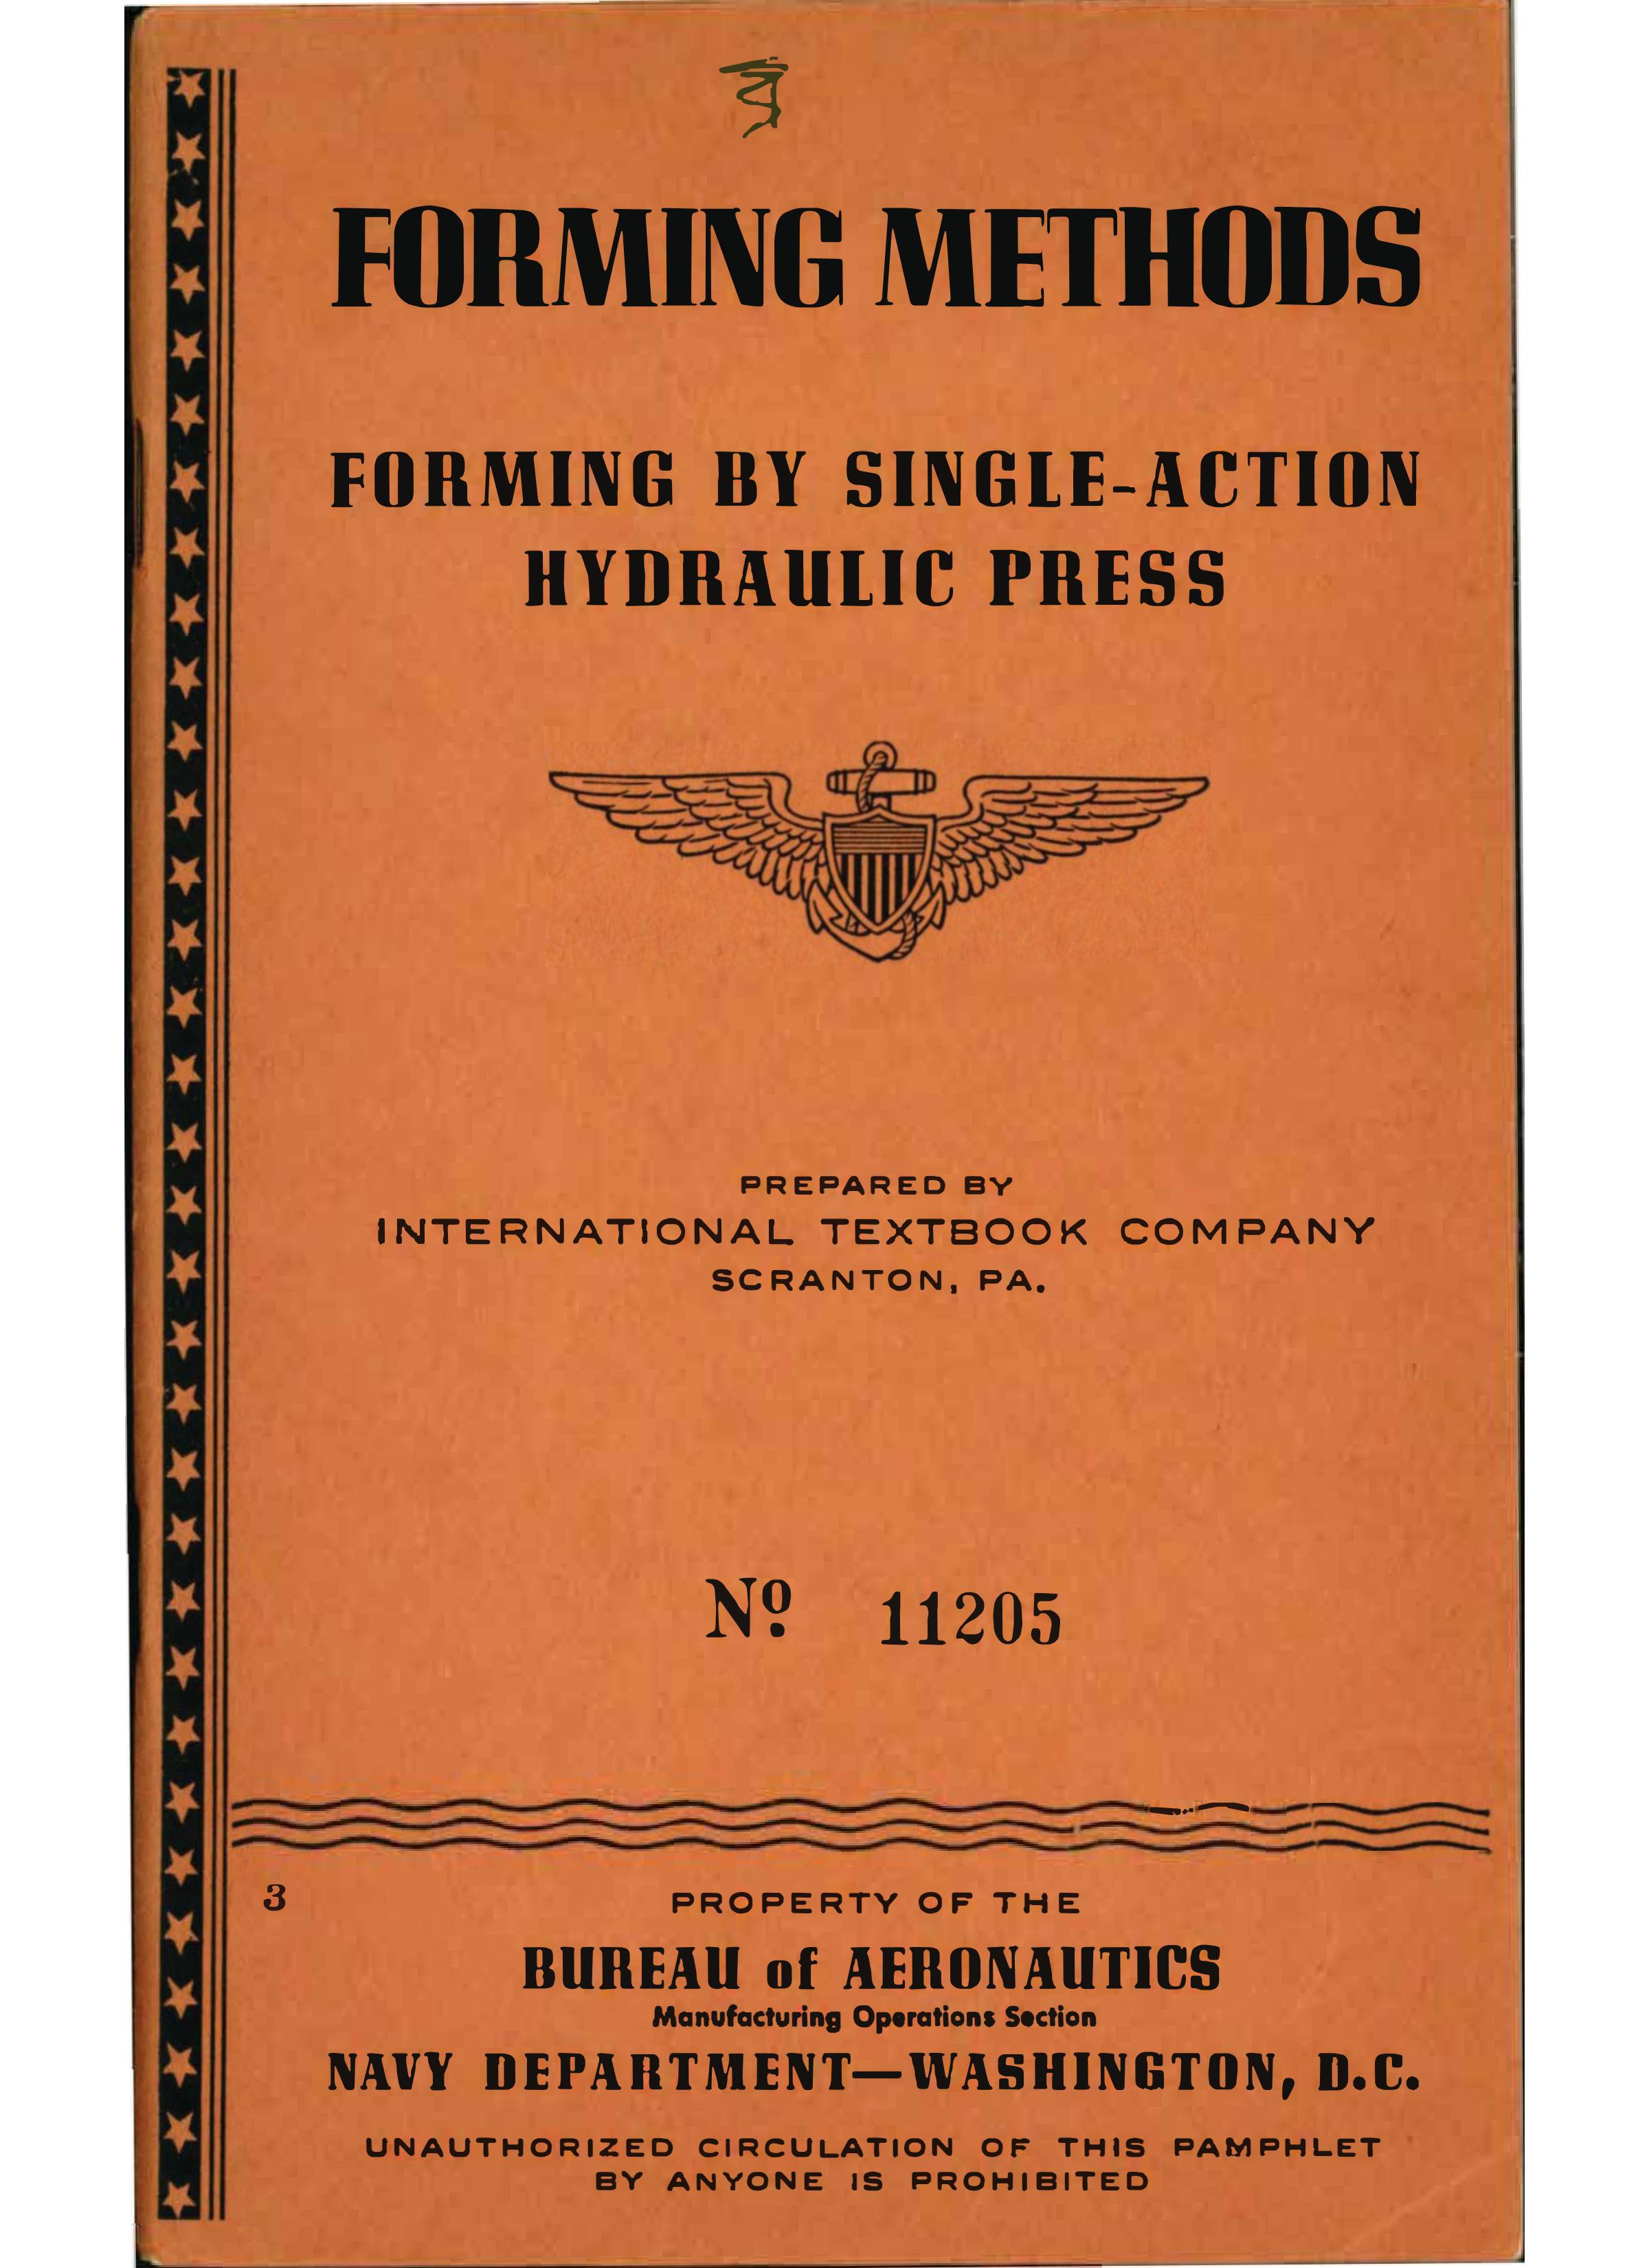 Sample page 1 from AirCorps Library document: Forming Methods - Single-Action Hydraulic Press - Bureau of Aeronautics